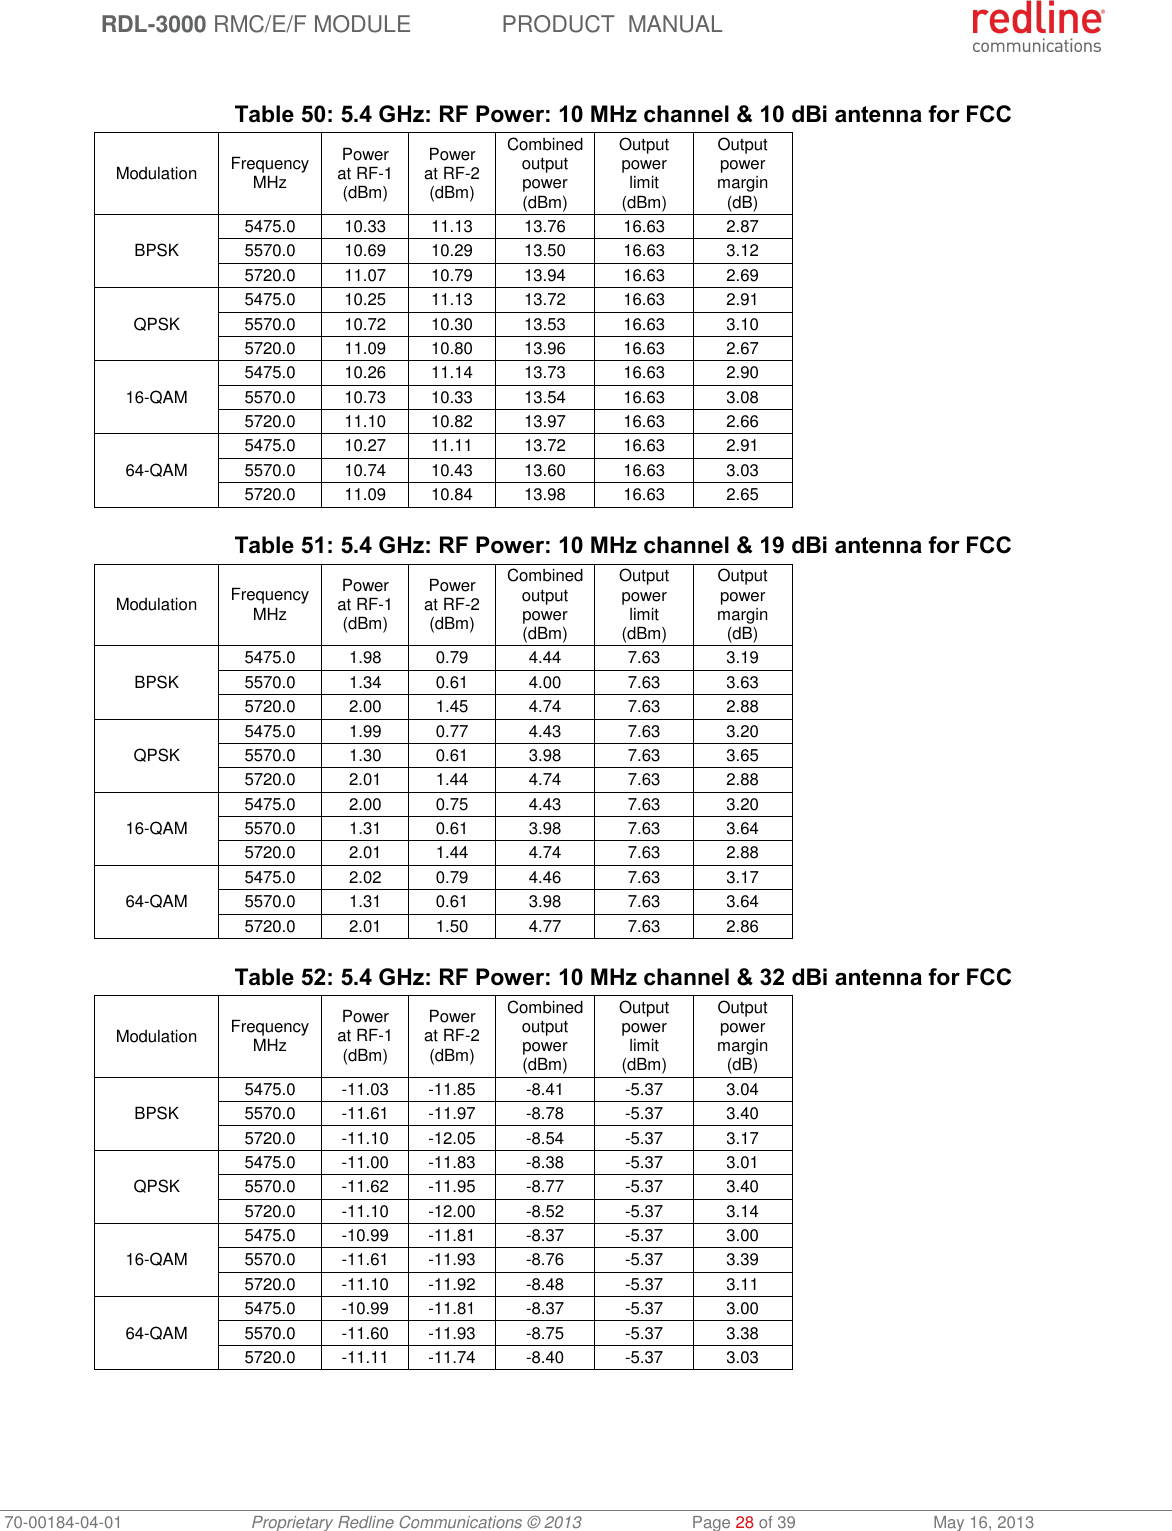  RDL-3000 RMC/E/F MODULE PRODUCT  MANUAL 70-00184-04-01 Proprietary Redline Communications © 2013  Page 28 of 39  May 16, 2013  Table 50: 5.4 GHz: RF Power: 10 MHz channel &amp; 10 dBi antenna for FCC Modulation FrequencyMHz Power at RF-1 (dBm) Power at RF-2 (dBm) Combined output power (dBm) Output power limit (dBm) Output power margin (dB) BPSK 5475.0 10.33 11.13 13.76 16.63 2.87 5570.0 10.69 10.29 13.50 16.63 3.12 5720.0 11.07 10.79 13.94 16.63 2.69 QPSK 5475.0 10.25 11.13 13.72 16.63 2.91 5570.0 10.72 10.30 13.53 16.63 3.10 5720.0 11.09 10.80 13.96 16.63 2.67 16-QAM 5475.0 10.26 11.14 13.73 16.63 2.90 5570.0 10.73 10.33 13.54 16.63 3.08 5720.0 11.10 10.82 13.97 16.63 2.66 64-QAM 5475.0 10.27 11.11 13.72 16.63 2.91 5570.0 10.74 10.43 13.60 16.63 3.03 5720.0 11.09 10.84 13.98 16.63 2.65  Table 51: 5.4 GHz: RF Power: 10 MHz channel &amp; 19 dBi antenna for FCC Modulation FrequencyMHz Power at RF-1 (dBm) Power at RF-2 (dBm) Combined output power (dBm) Output power limit (dBm) Output power margin (dB) BPSK 5475.0 1.98 0.79 4.44 7.63 3.19 5570.0 1.34 0.61 4.00 7.63 3.63 5720.0 2.00 1.45 4.74 7.63 2.88 QPSK 5475.0 1.99 0.77 4.43 7.63 3.20 5570.0 1.30 0.61 3.98 7.63 3.65 5720.0 2.01 1.44 4.74 7.63 2.88 16-QAM 5475.0 2.00 0.75 4.43 7.63 3.20 5570.0 1.31 0.61 3.98 7.63 3.64 5720.0 2.01 1.44 4.74 7.63 2.88 64-QAM 5475.0 2.02 0.79 4.46 7.63 3.17 5570.0 1.31 0.61 3.98 7.63 3.64 5720.0 2.01 1.50 4.77 7.63 2.86  Table 52: 5.4 GHz: RF Power: 10 MHz channel &amp; 32 dBi antenna for FCC Modulation FrequencyMHz Power at RF-1 (dBm) Power at RF-2 (dBm) Combined output power (dBm) Output power limit (dBm) Output power margin (dB) BPSK 5475.0 -11.03 -11.85 -8.41 -5.37 3.04 5570.0 -11.61 -11.97 -8.78 -5.37 3.40 5720.0 -11.10 -12.05 -8.54 -5.37 3.17 QPSK 5475.0 -11.00 -11.83 -8.38 -5.37 3.01 5570.0 -11.62 -11.95 -8.77 -5.37 3.40 5720.0 -11.10 -12.00 -8.52 -5.37 3.14 16-QAM 5475.0 -10.99 -11.81 -8.37 -5.37 3.00 5570.0 -11.61 -11.93 -8.76 -5.37 3.39 5720.0 -11.10 -11.92 -8.48 -5.37 3.11 64-QAM 5475.0 -10.99 -11.81 -8.37 -5.37 3.00 5570.0 -11.60 -11.93 -8.75 -5.37 3.38 5720.0 -11.11 -11.74 -8.40 -5.37 3.03  